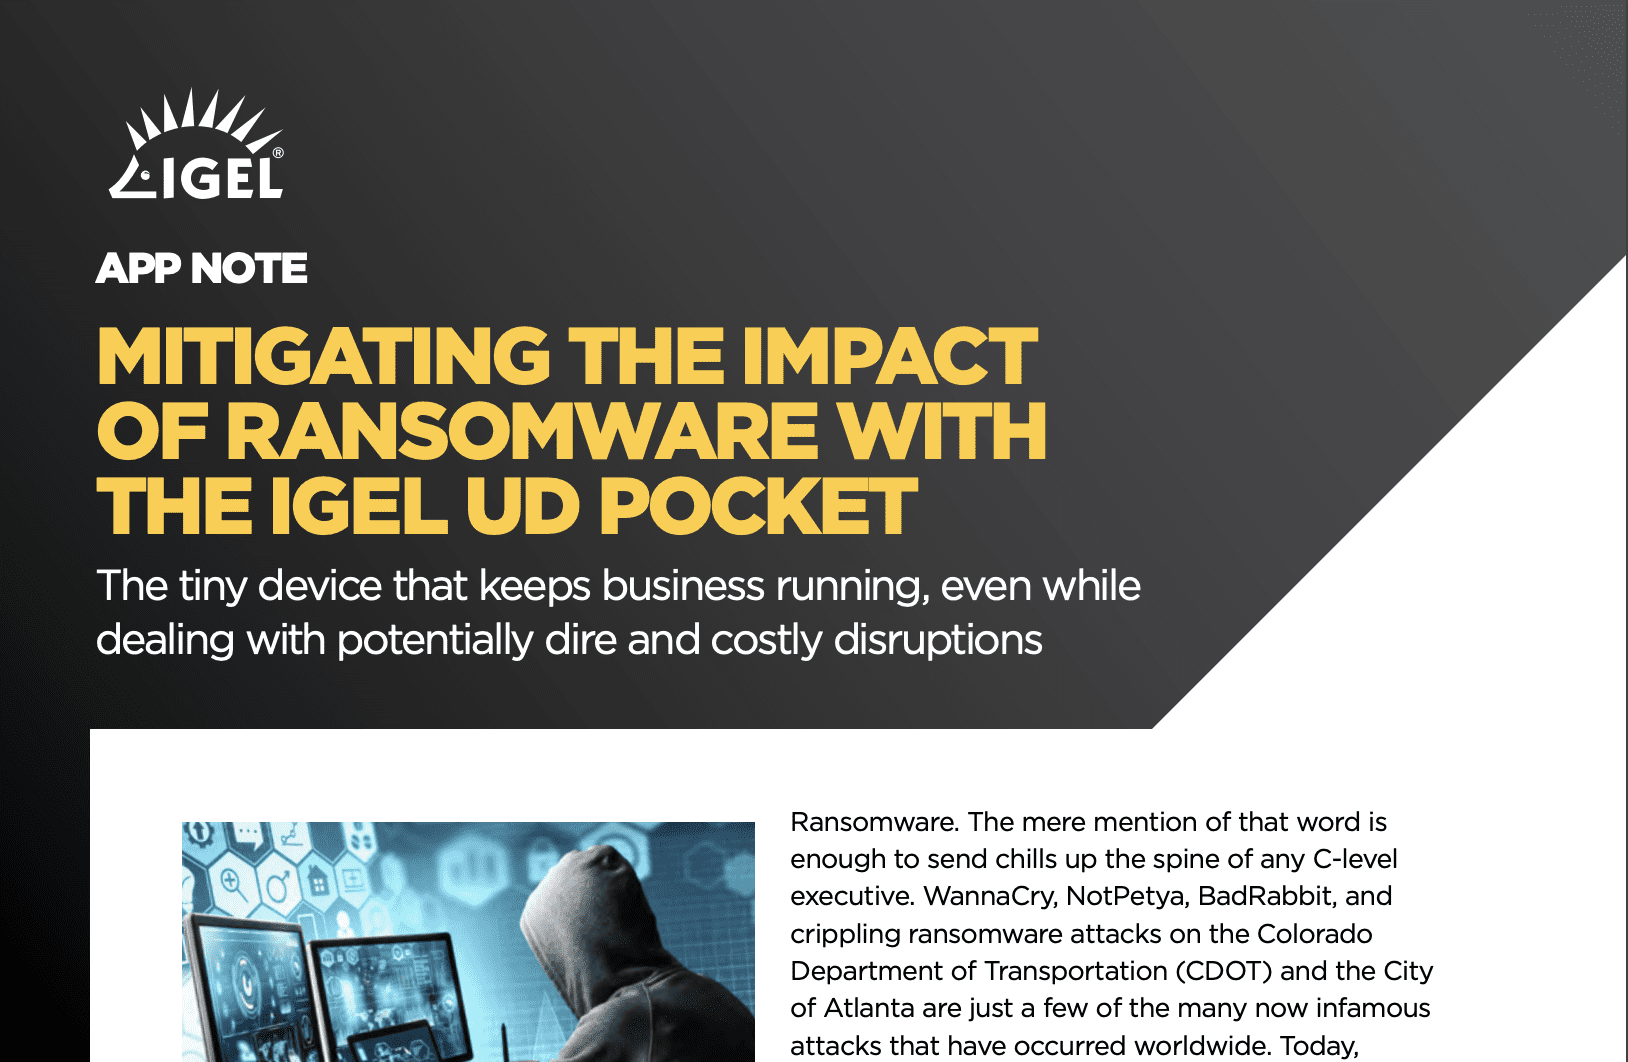 Mitigating the Impact of Ransomware with the IGEL UD Pocket